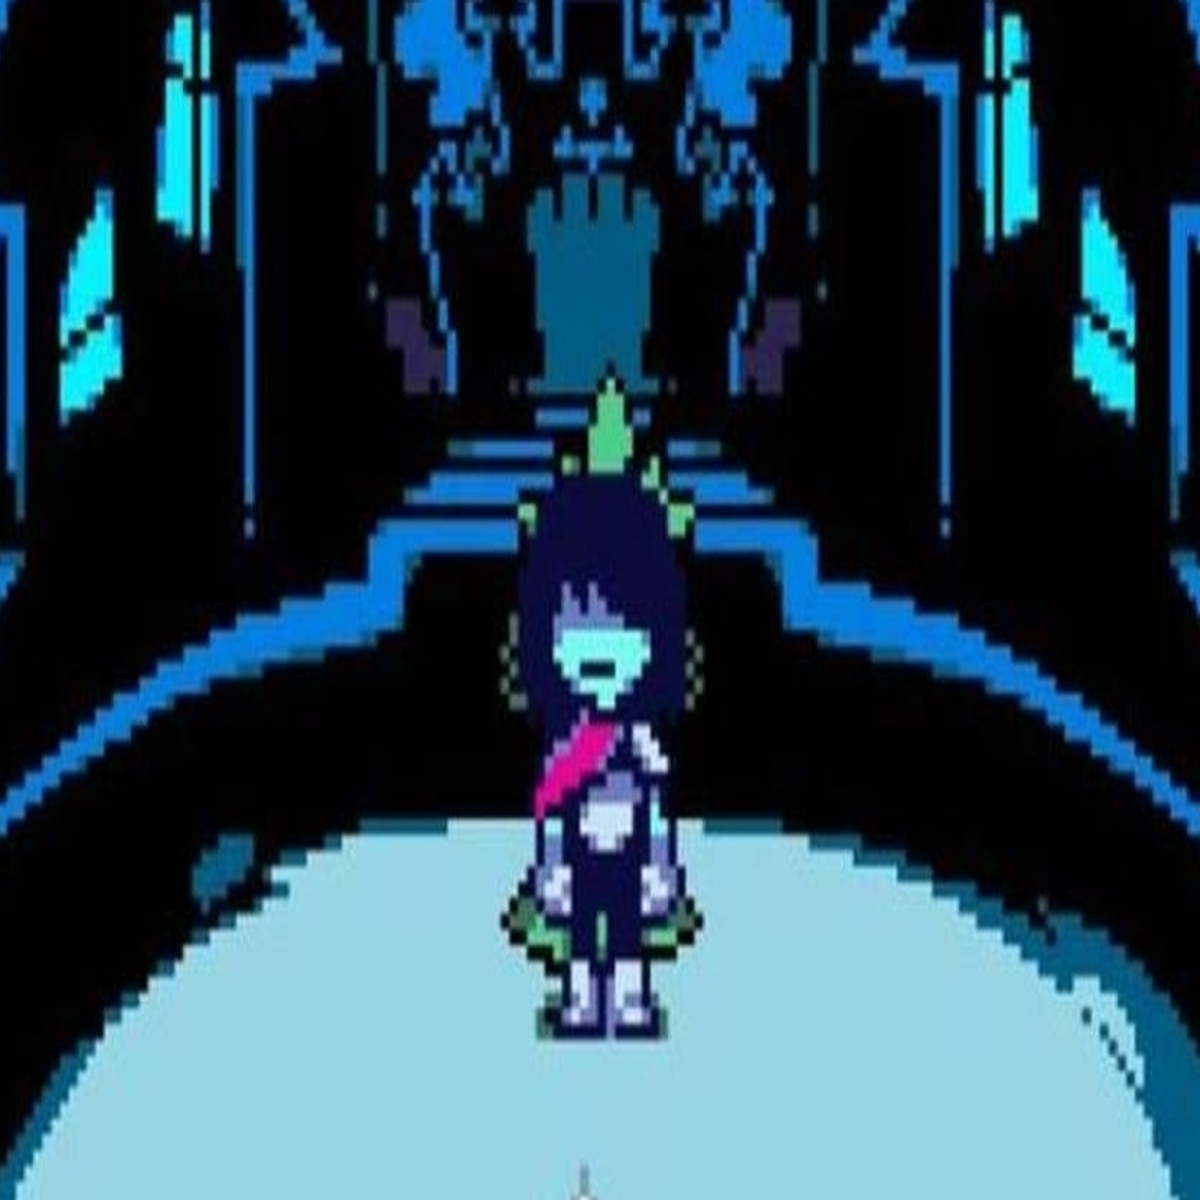 Chapter 2 of Deltarune will be released for free